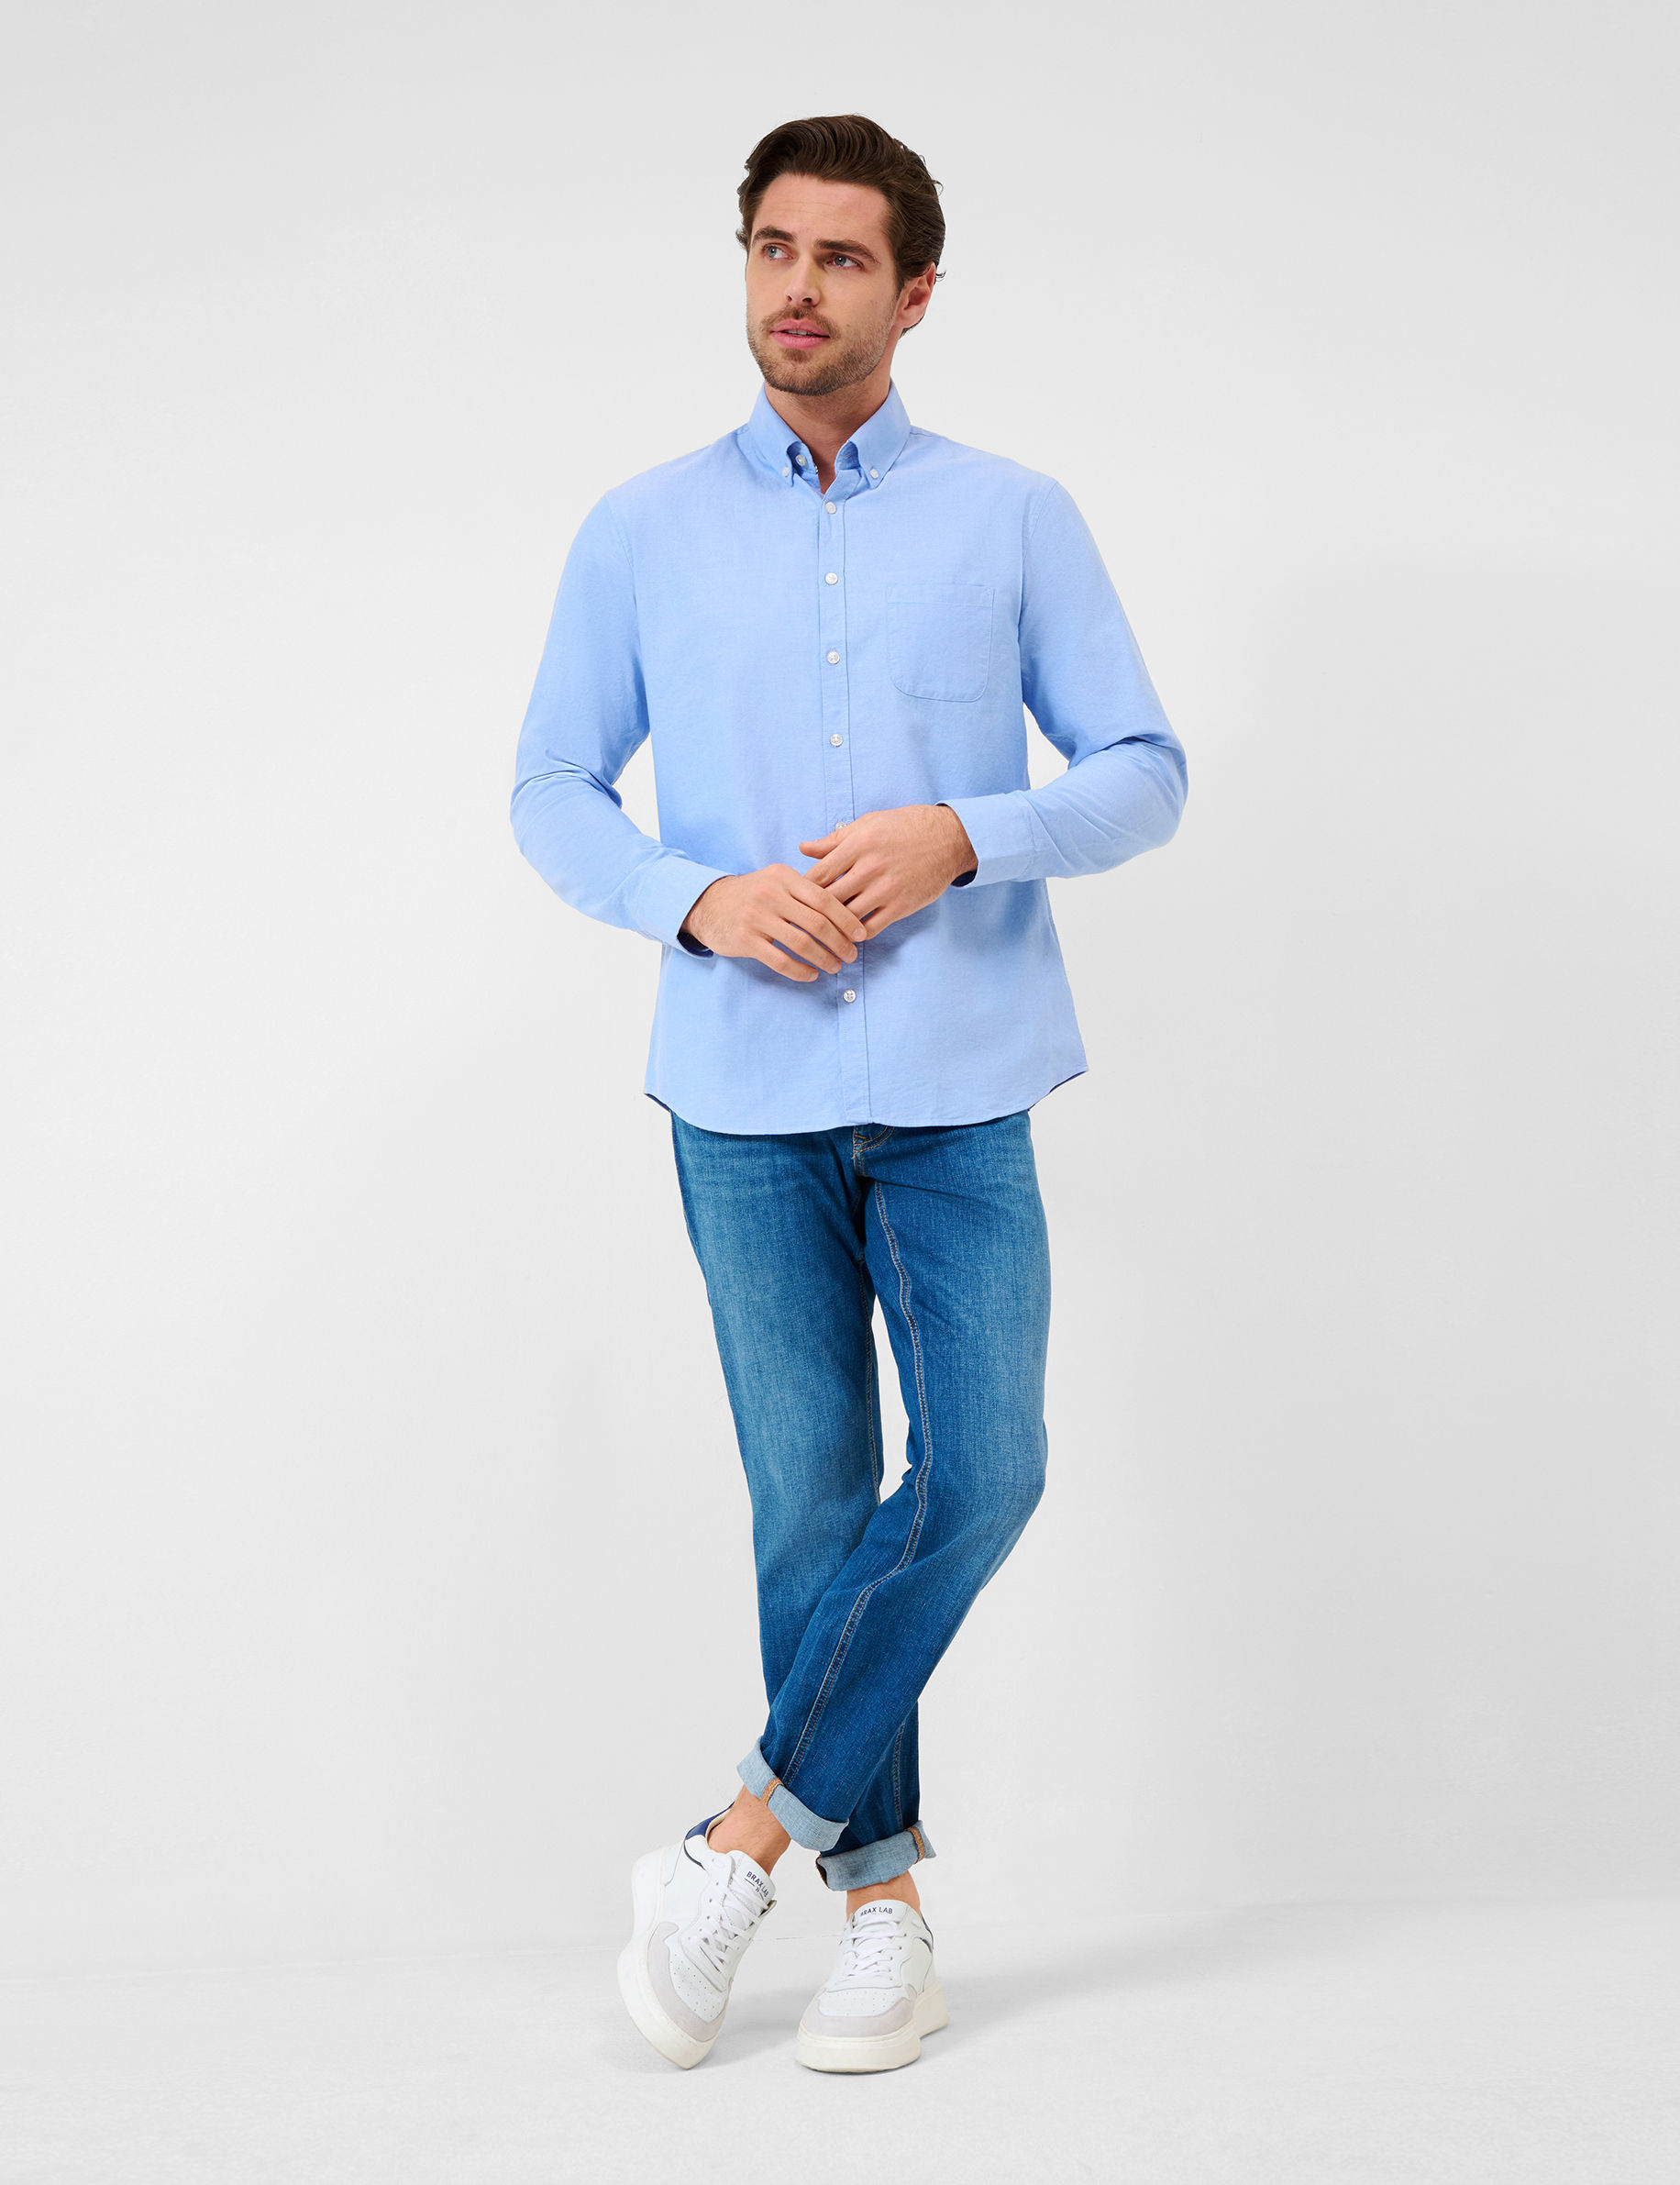 Men Style DANIEL SMOOTH BLUE  Model Outfit